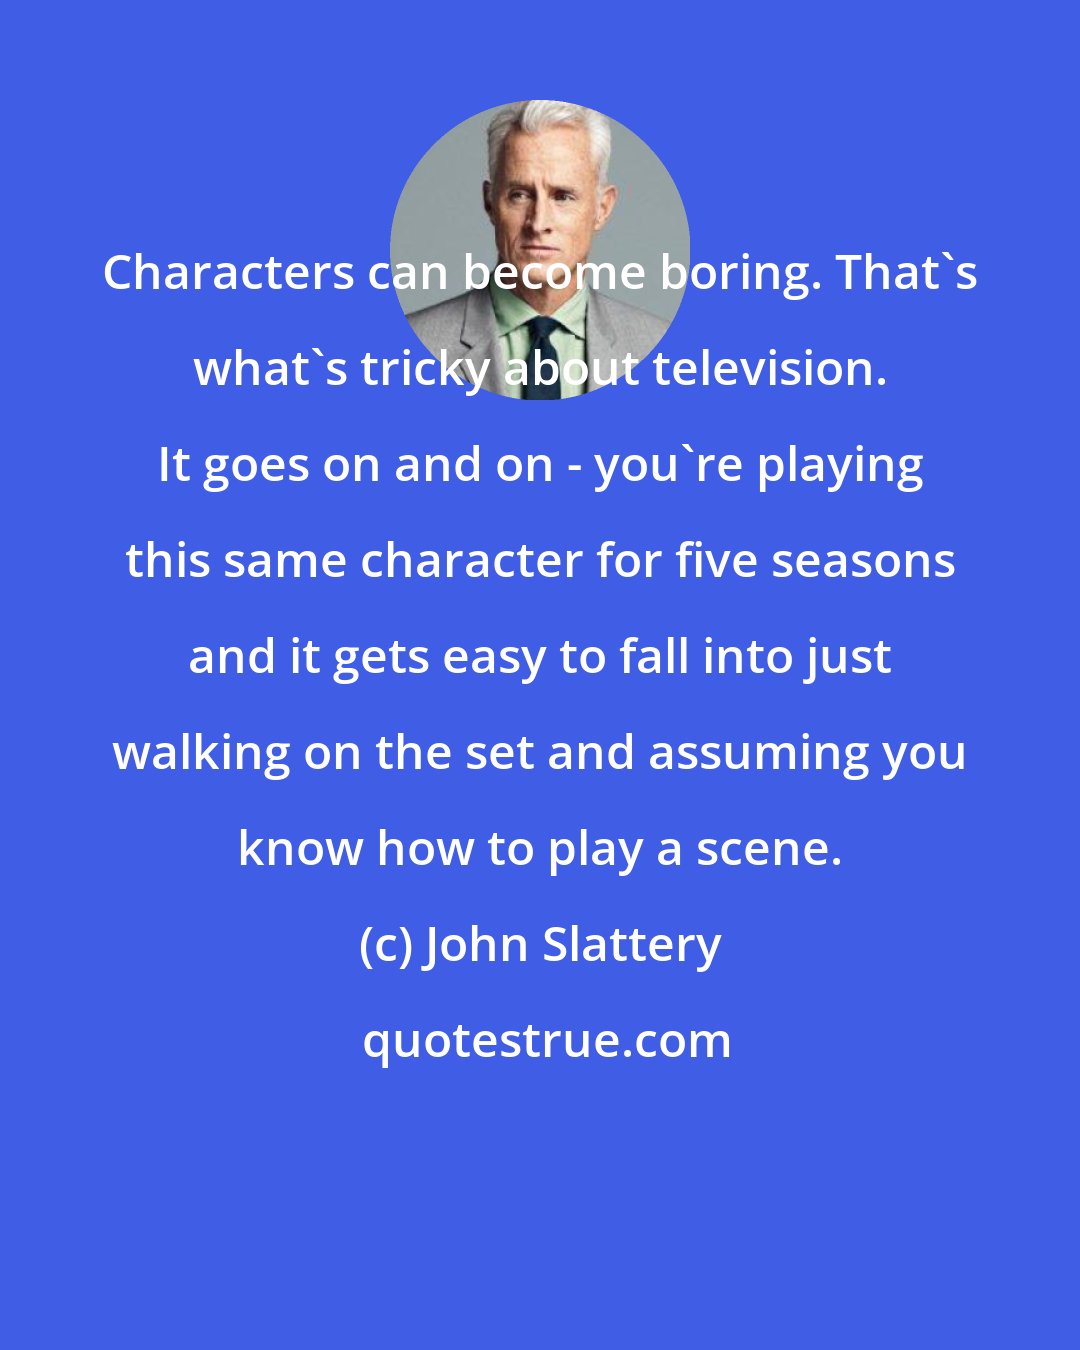 John Slattery: Characters can become boring. That's what's tricky about television. It goes on and on - you're playing this same character for five seasons and it gets easy to fall into just walking on the set and assuming you know how to play a scene.